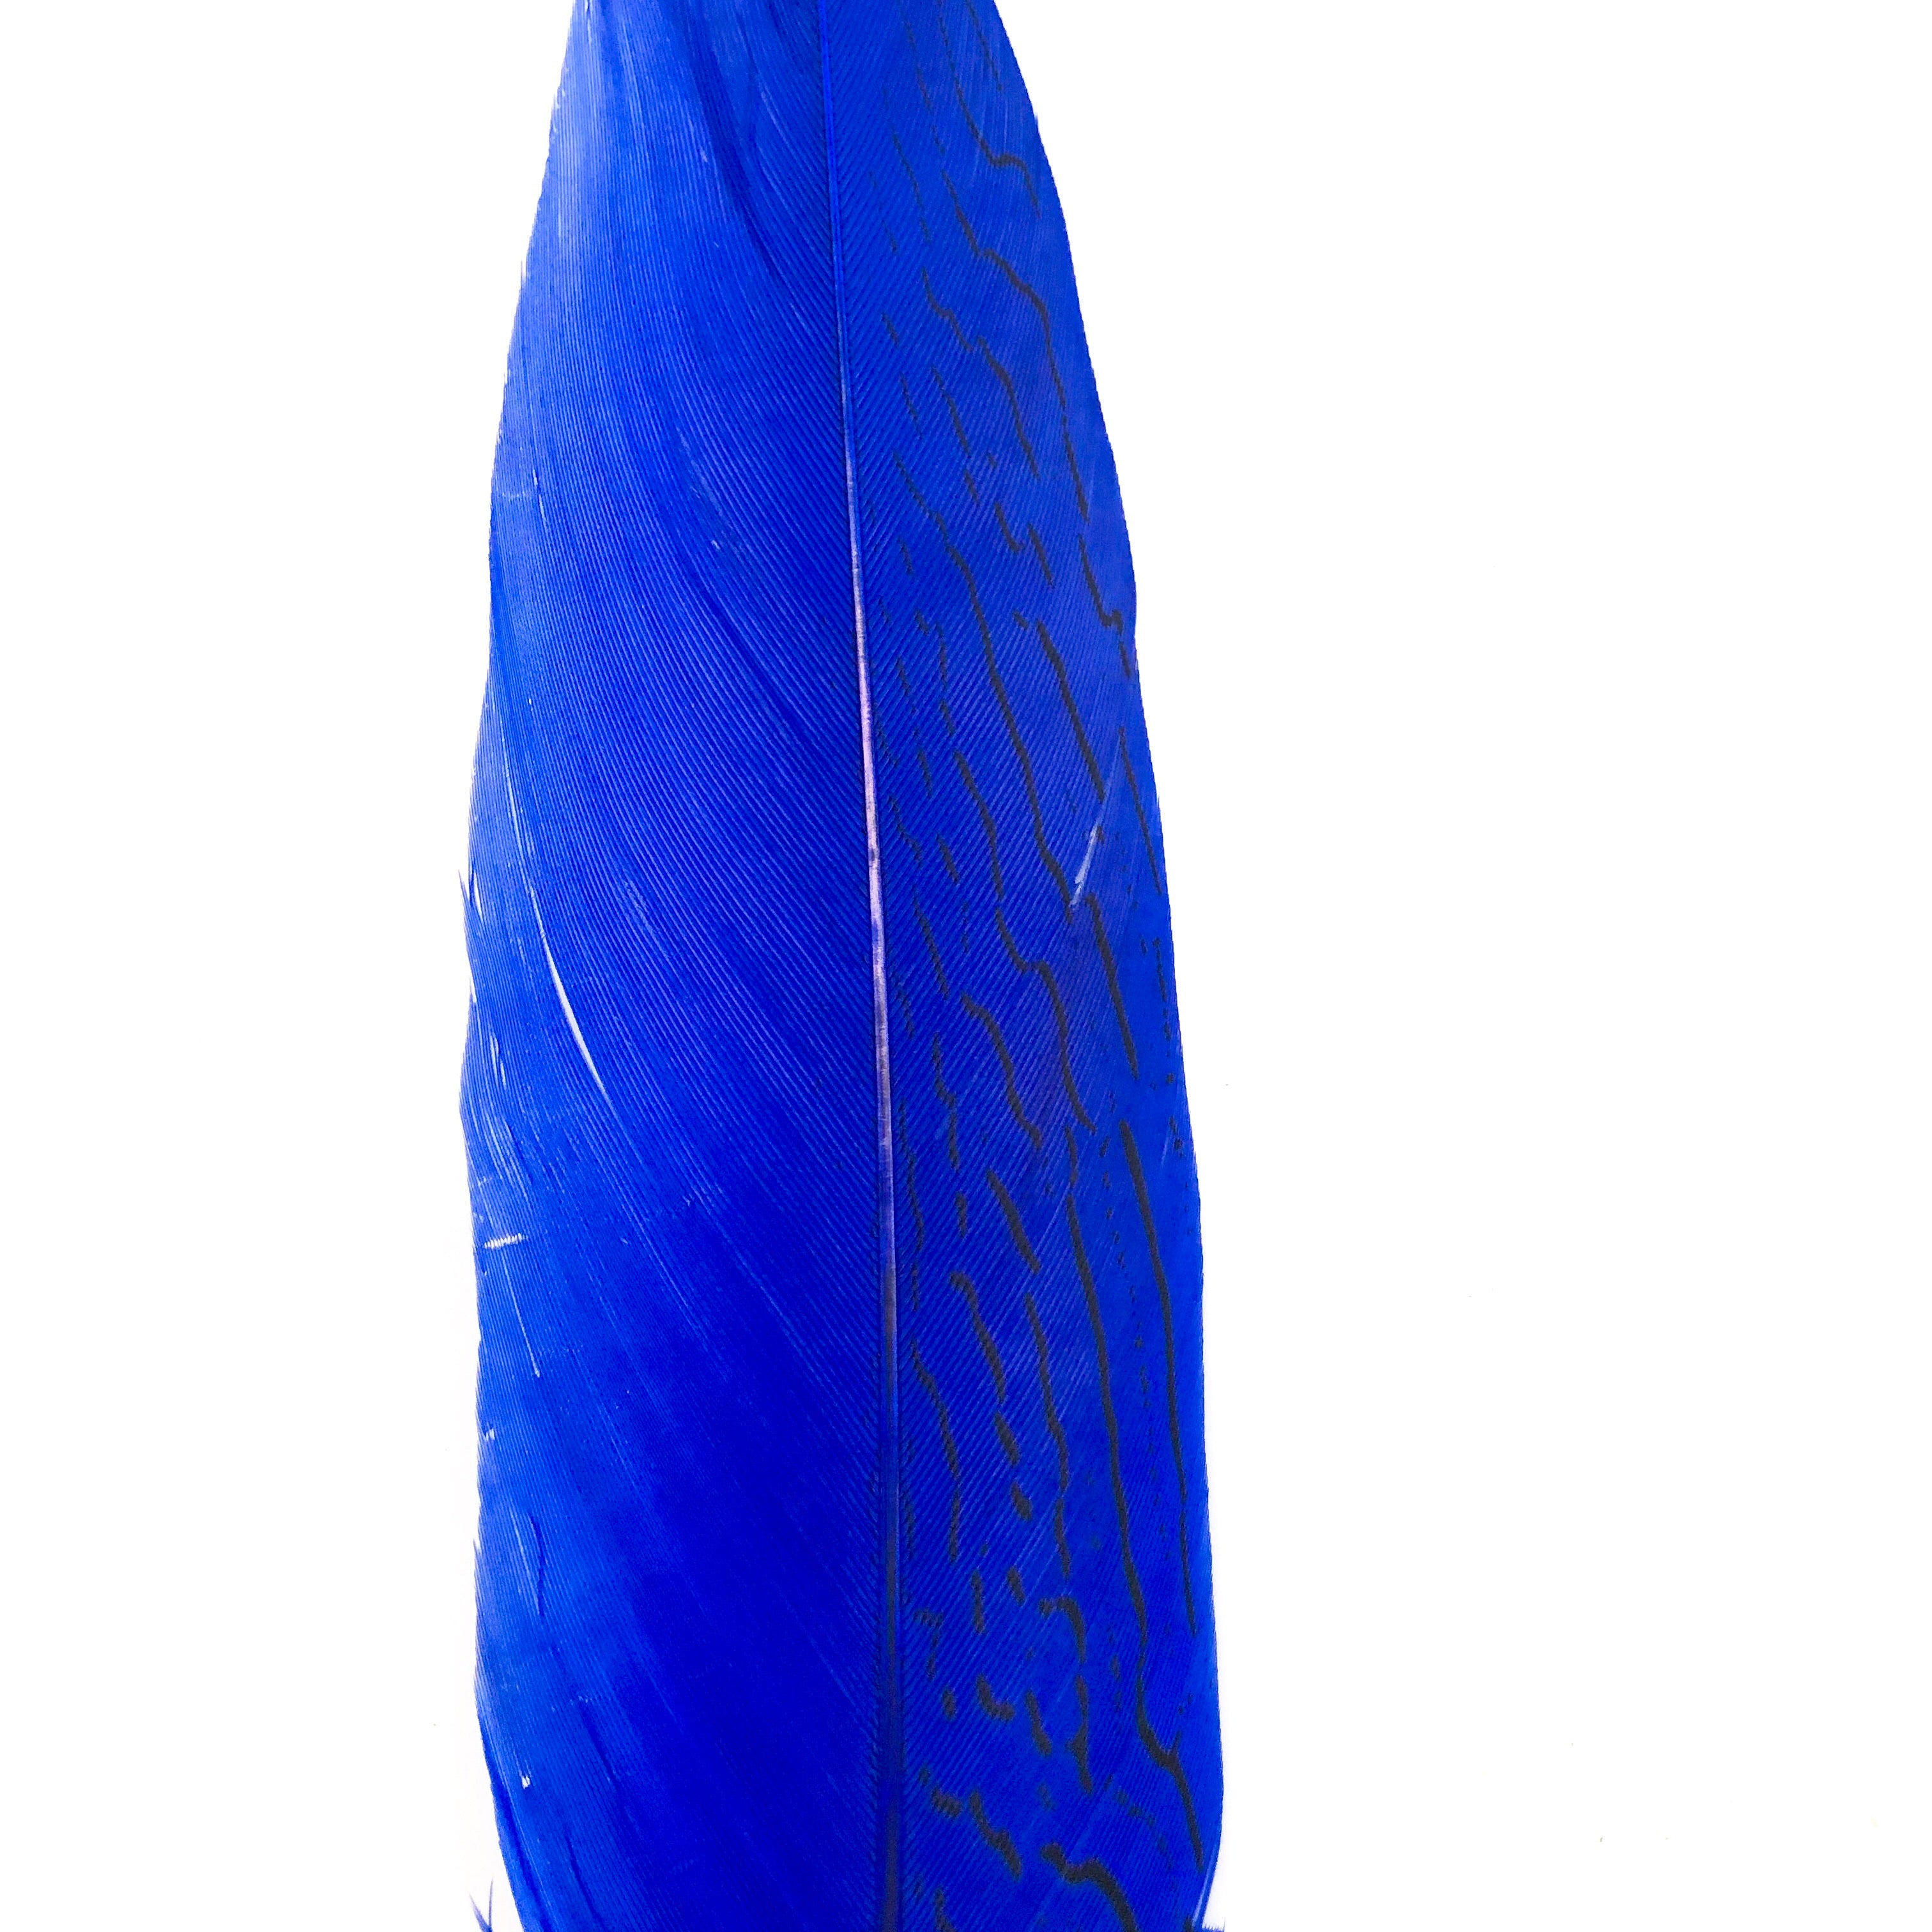 10" to 20" Silver Pheasant Tail Feather - Royal Blue